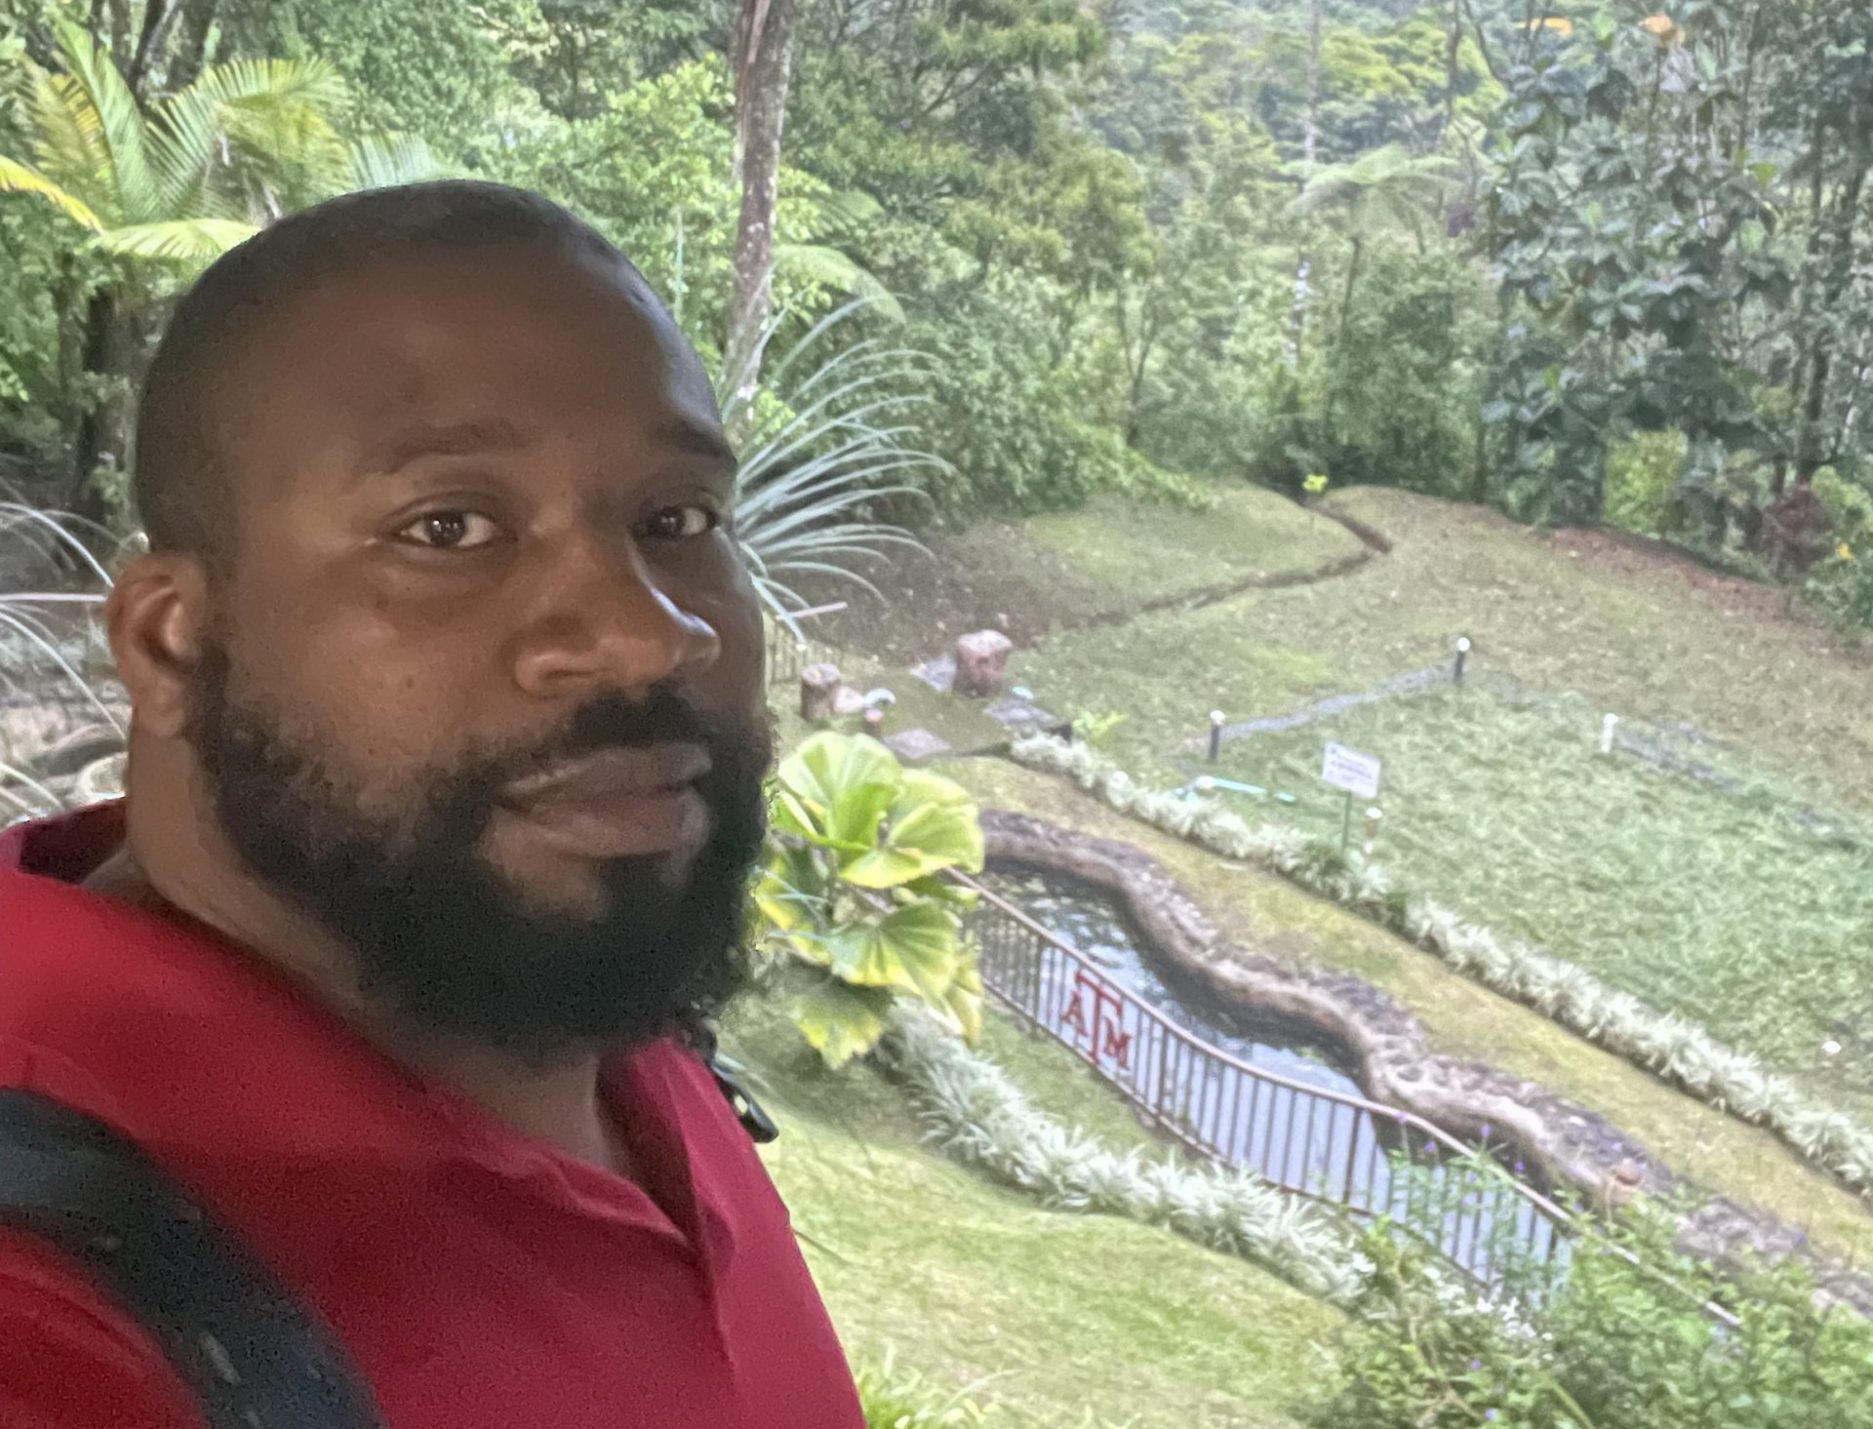 Duane Bedgood in a tropical forest field.